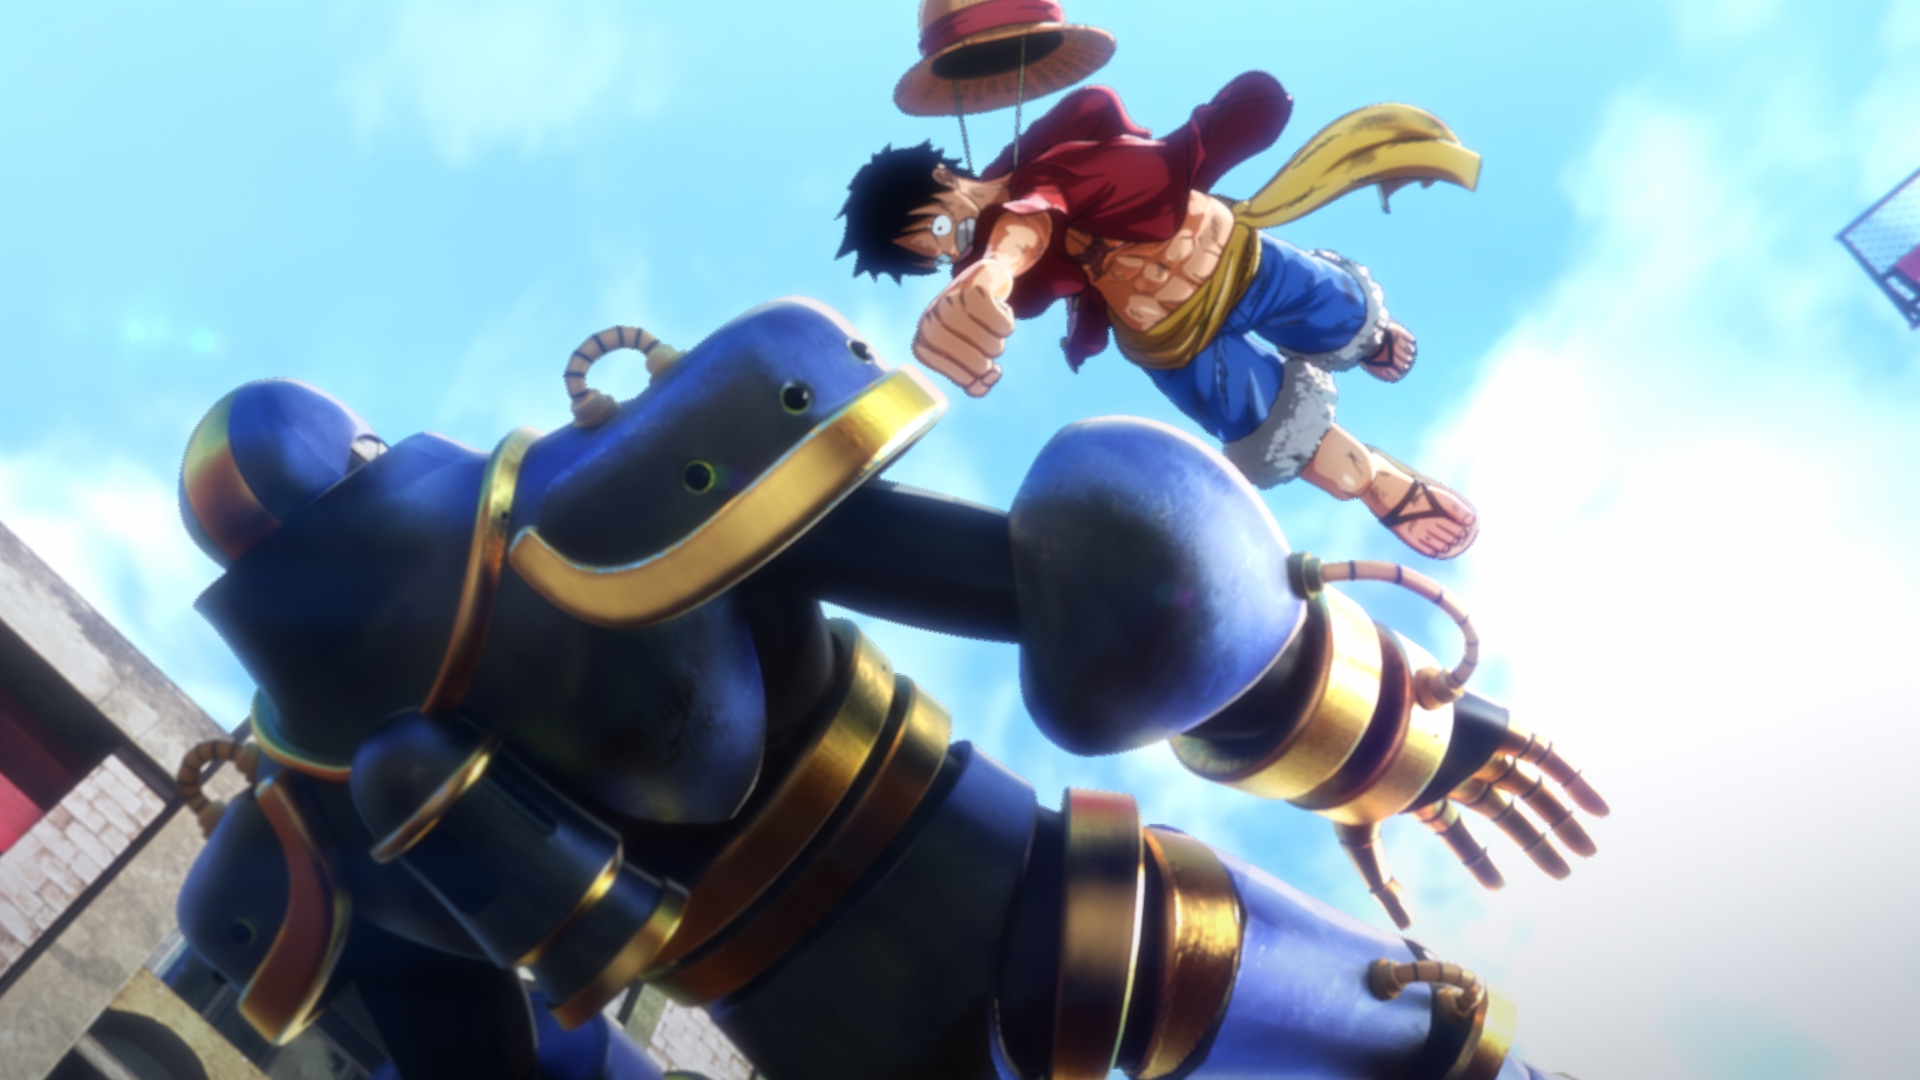 5 Awesome One Piece Video Games To Hold You Over Until World Seeker -  Crunchyroll News